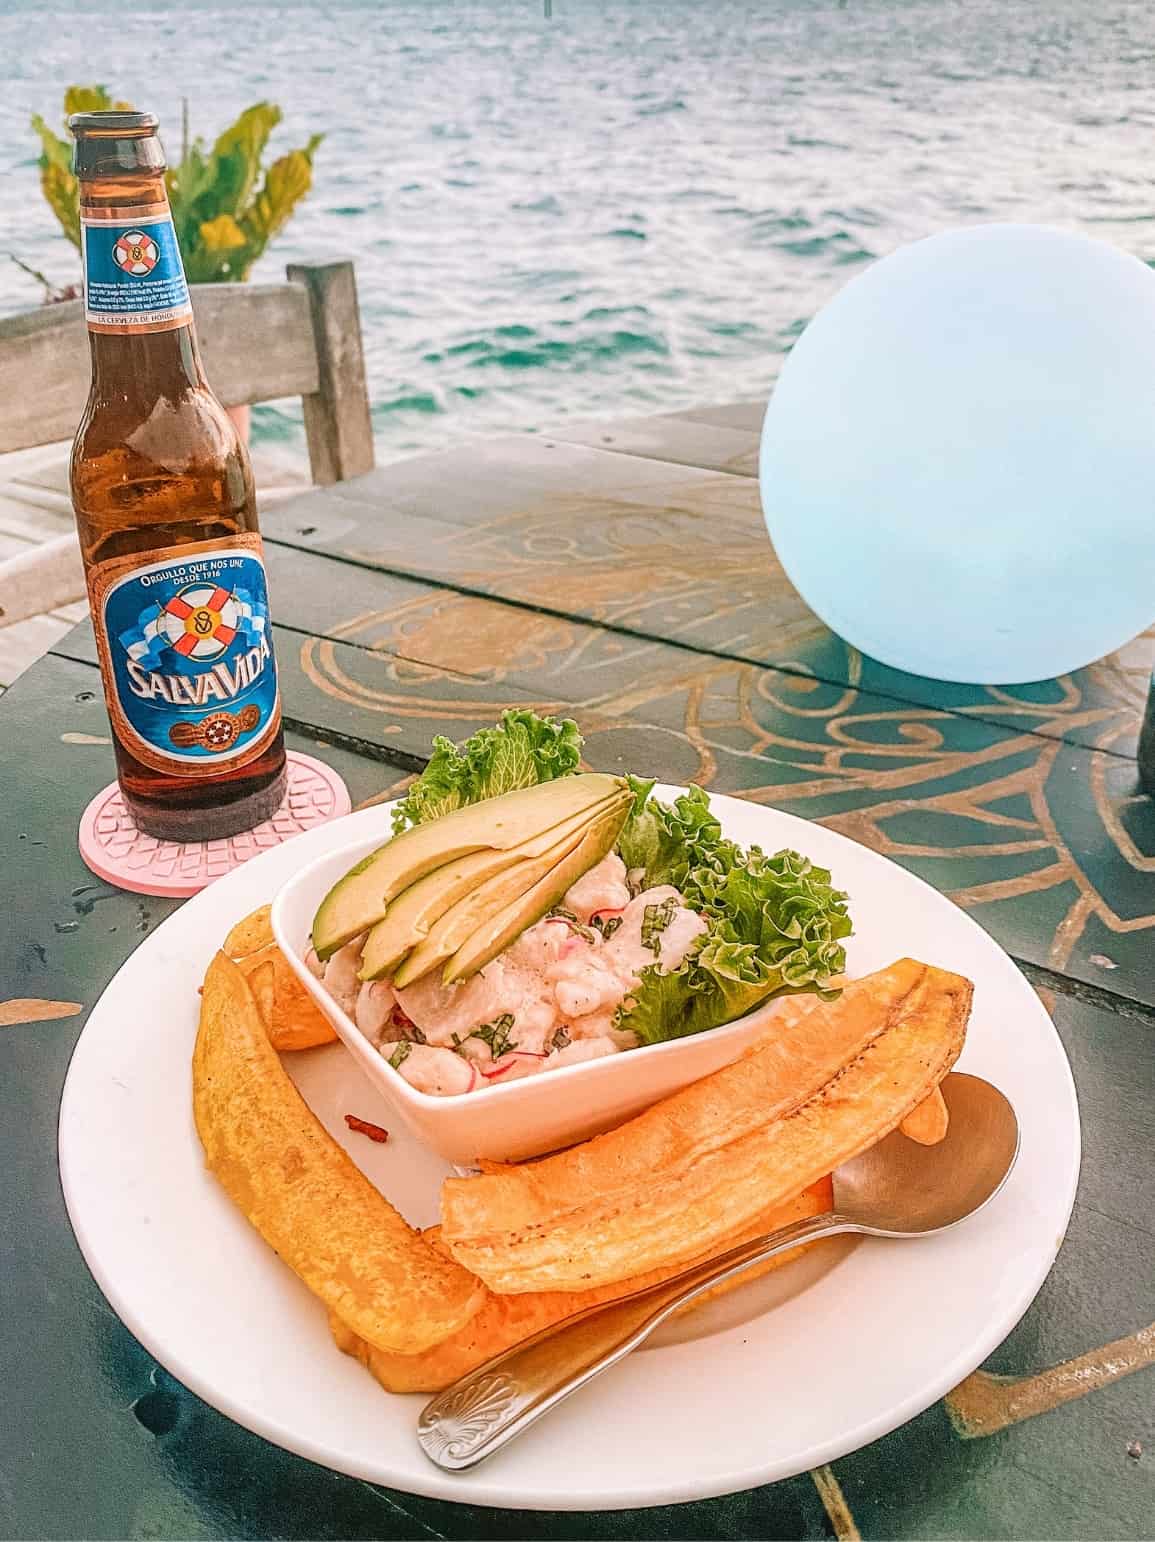 A delicious dinner of lionfish ceviche and fried plantains at Utila's Mango Tango restaurant